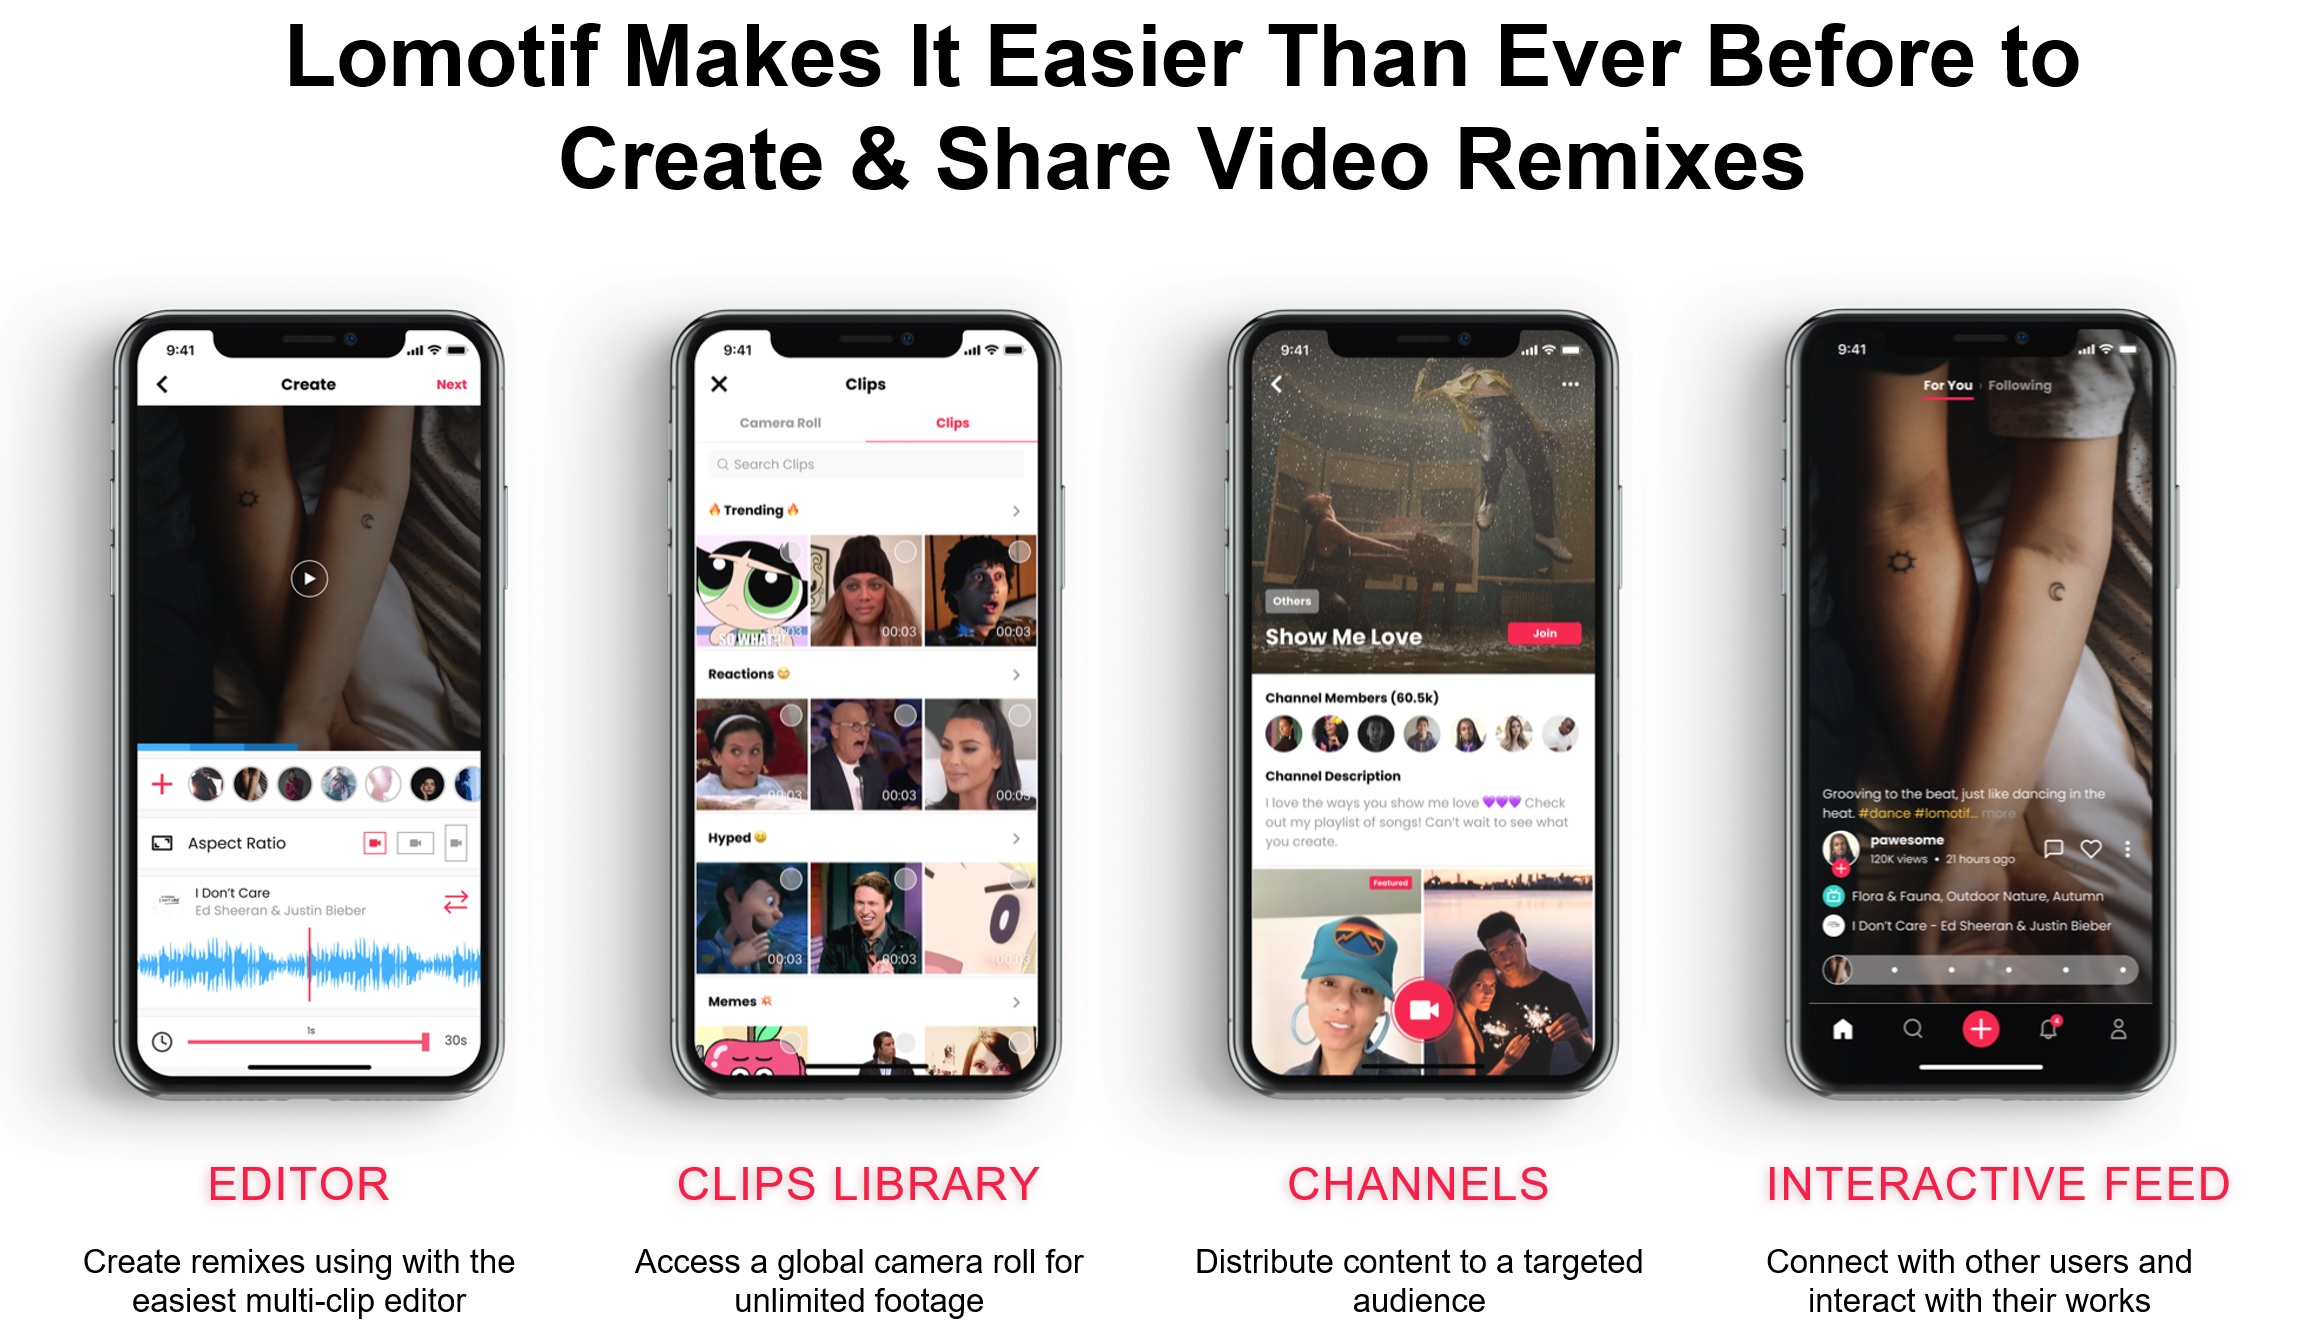 Lomotif makes it easier than ever to create & share video remixes